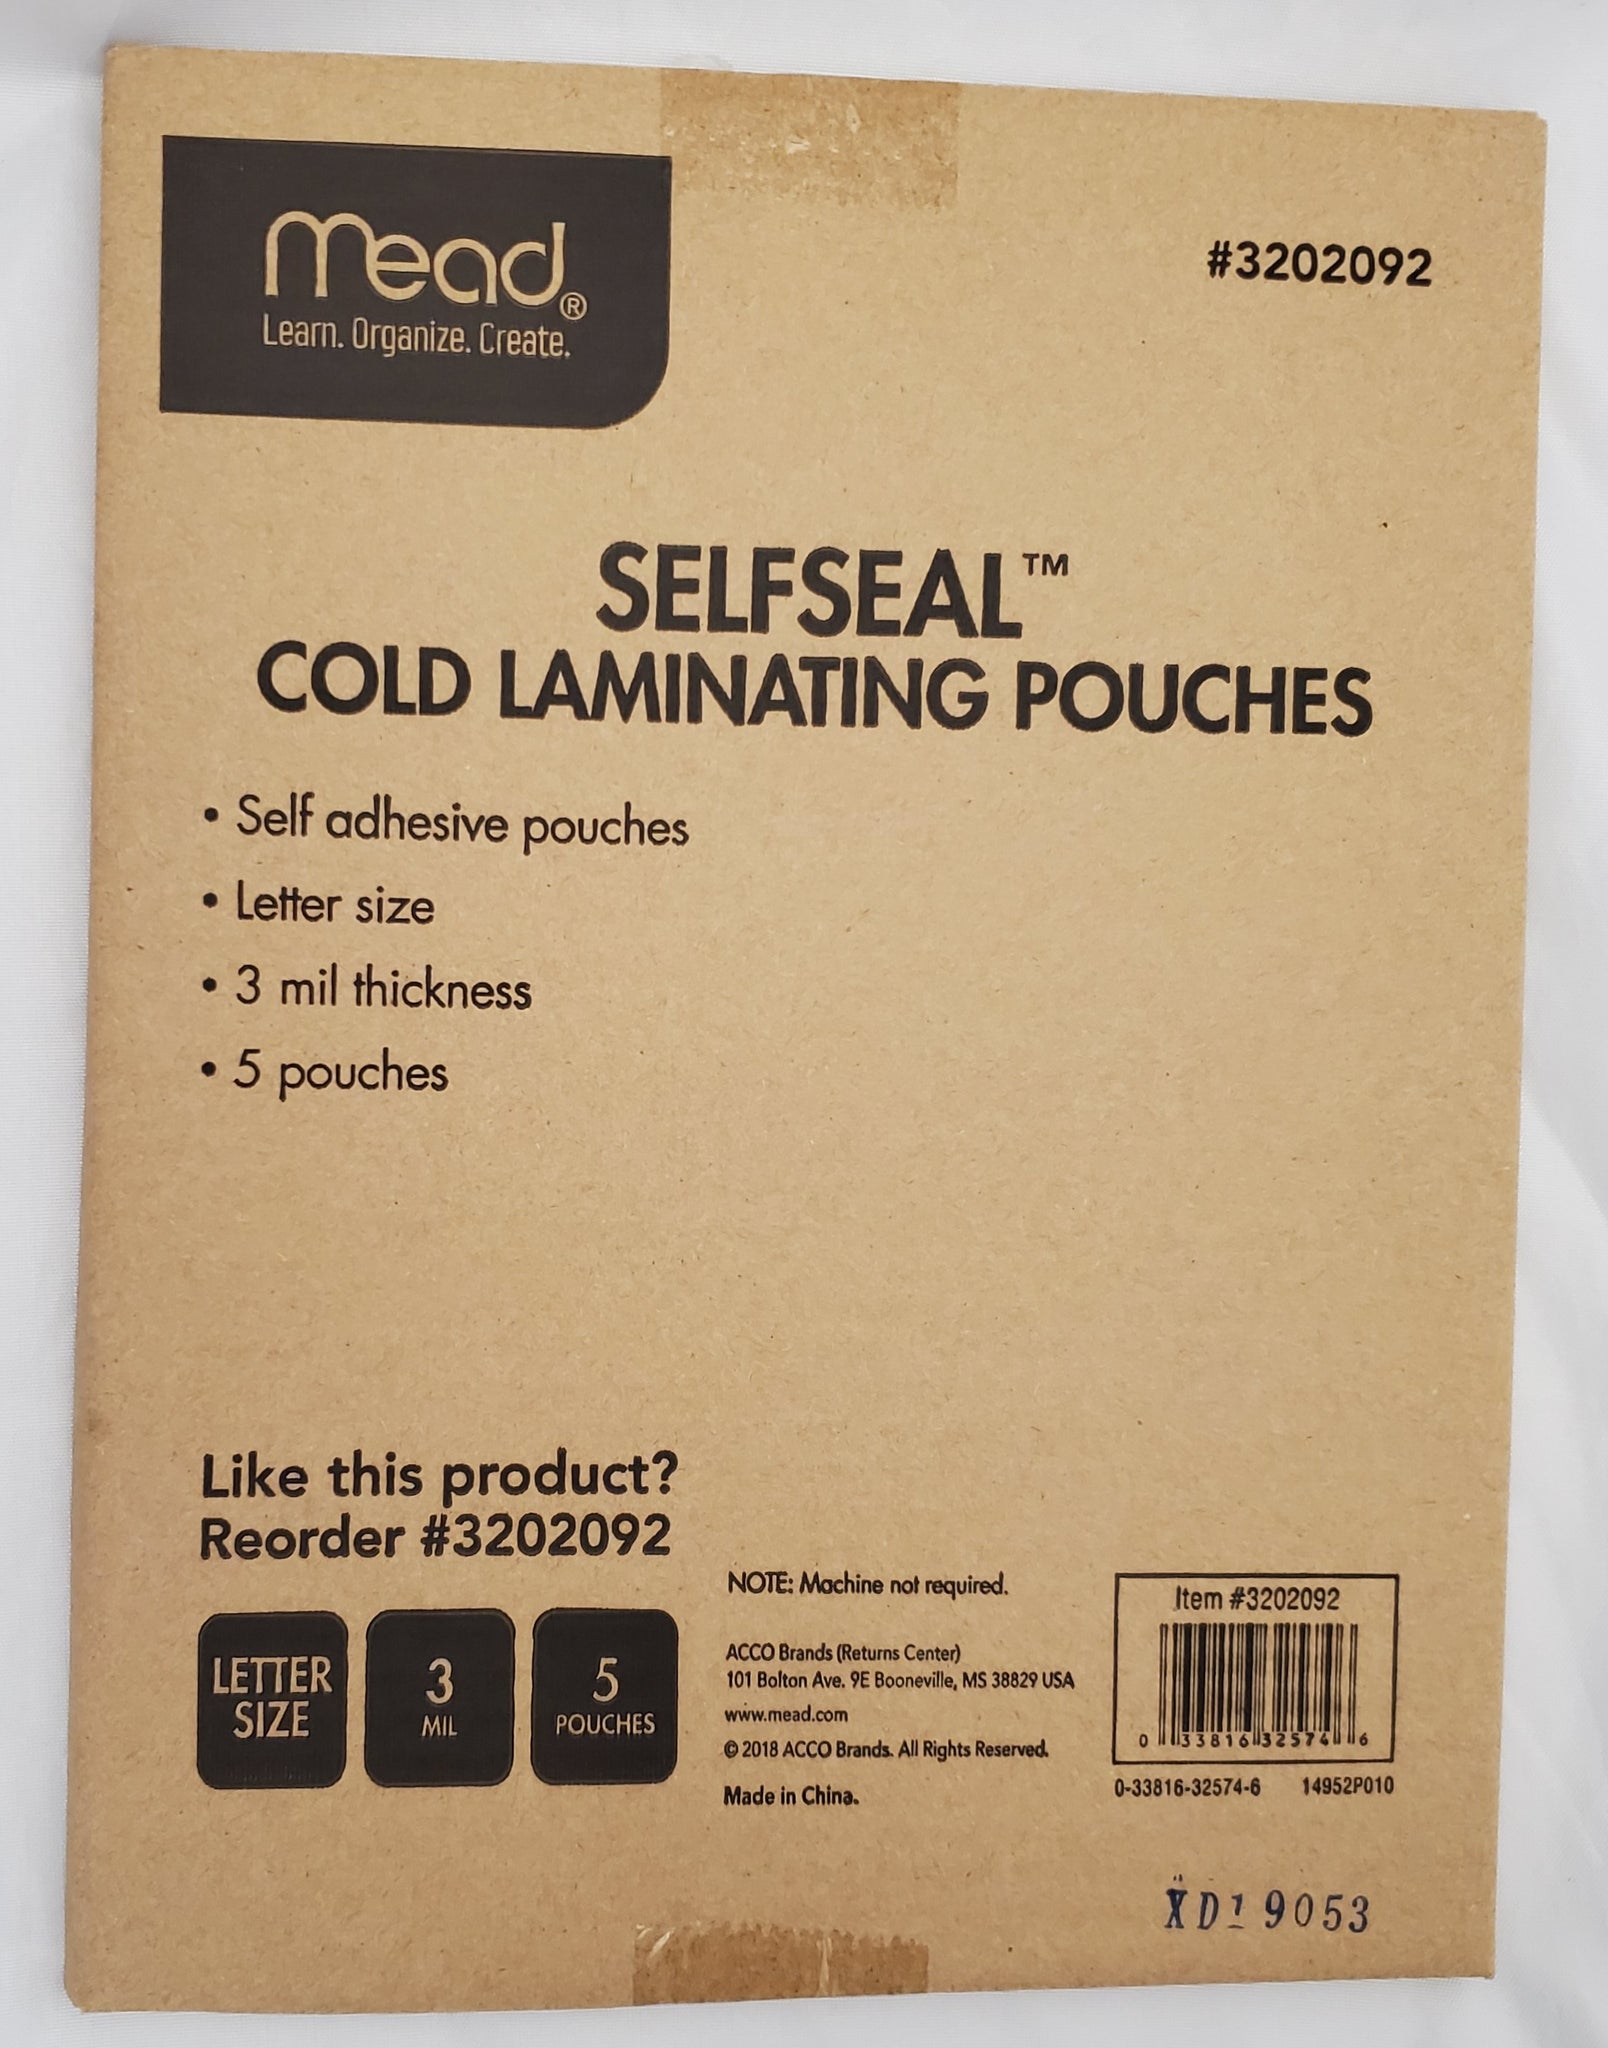 Mead Self-Seal Cold Laminating Pouches, 5 Pack 8.5" x 11" 3 mil (3202092)